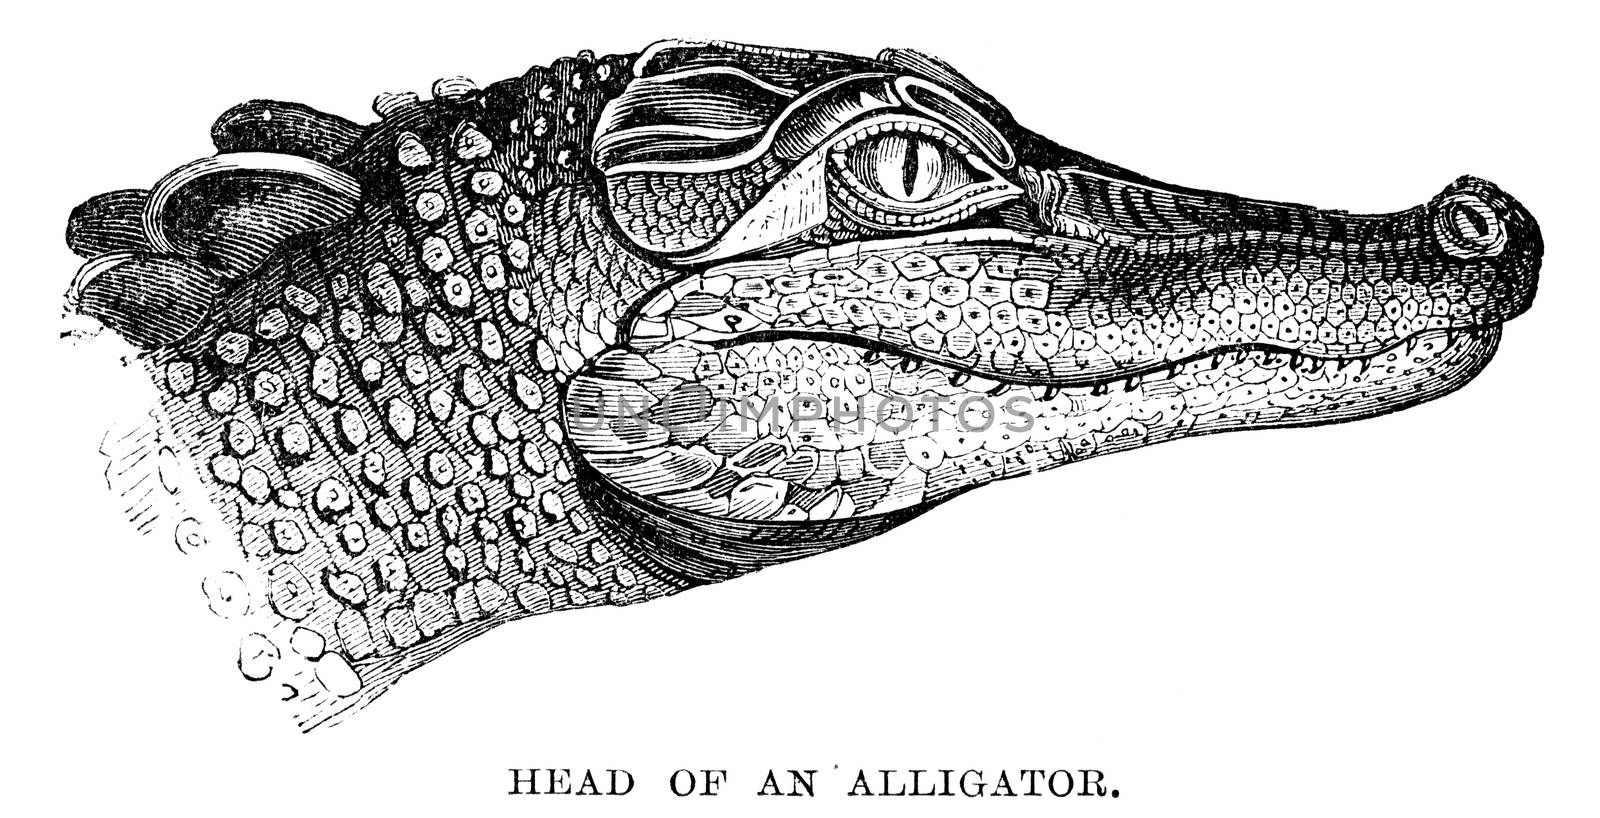 An engraved animal image of the head of an alligator  by ant